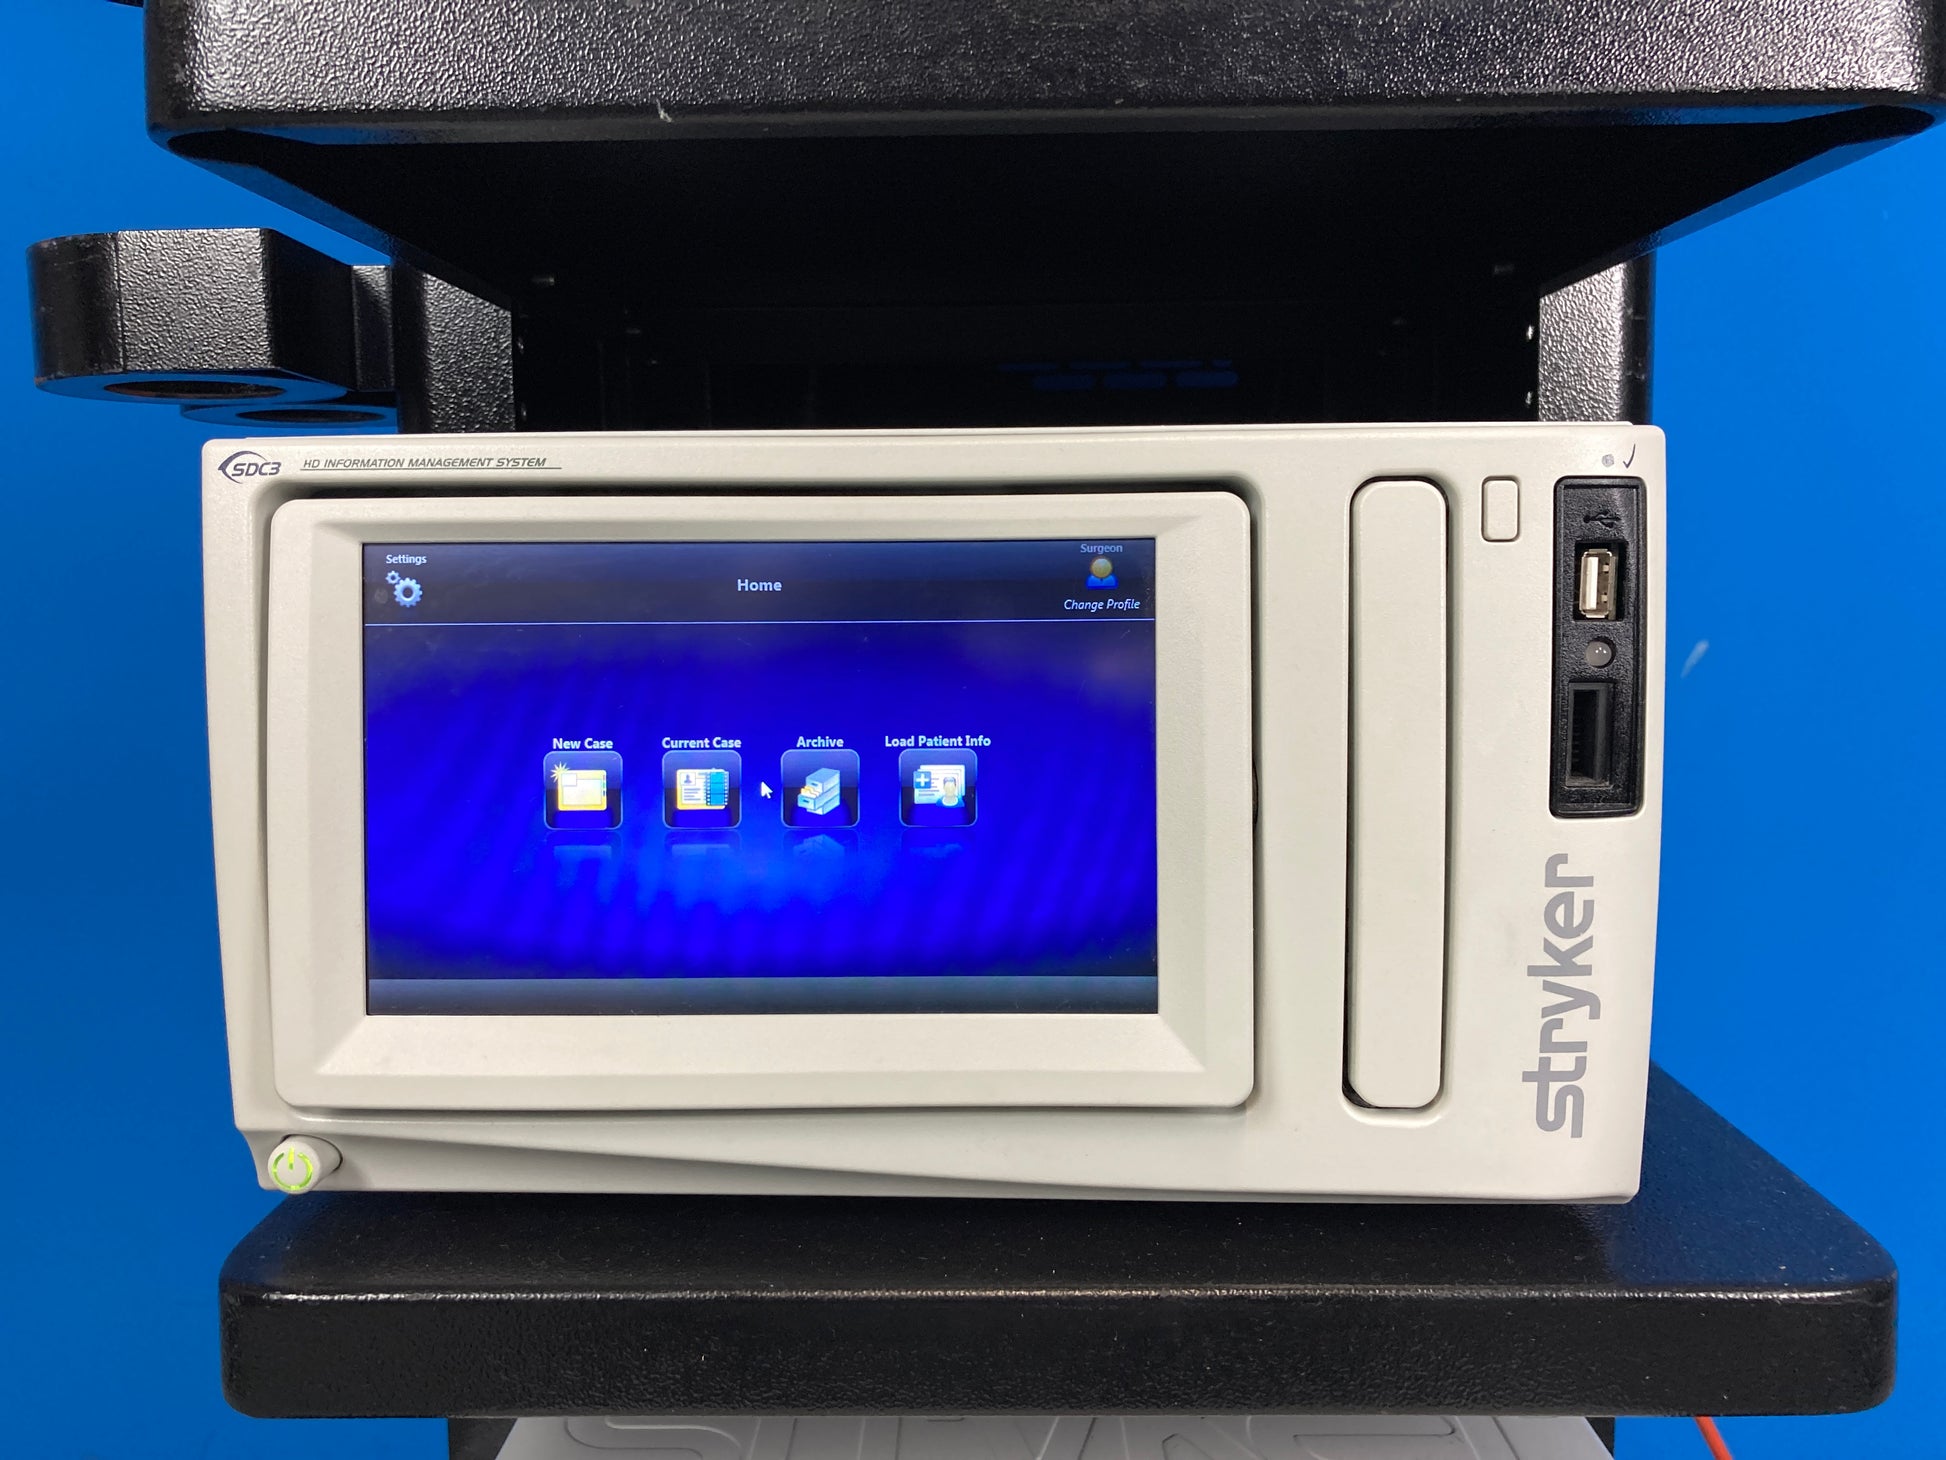 The SDC3 is a computer-based unit that records, manages, and archives digital images and videos of surgical procedures